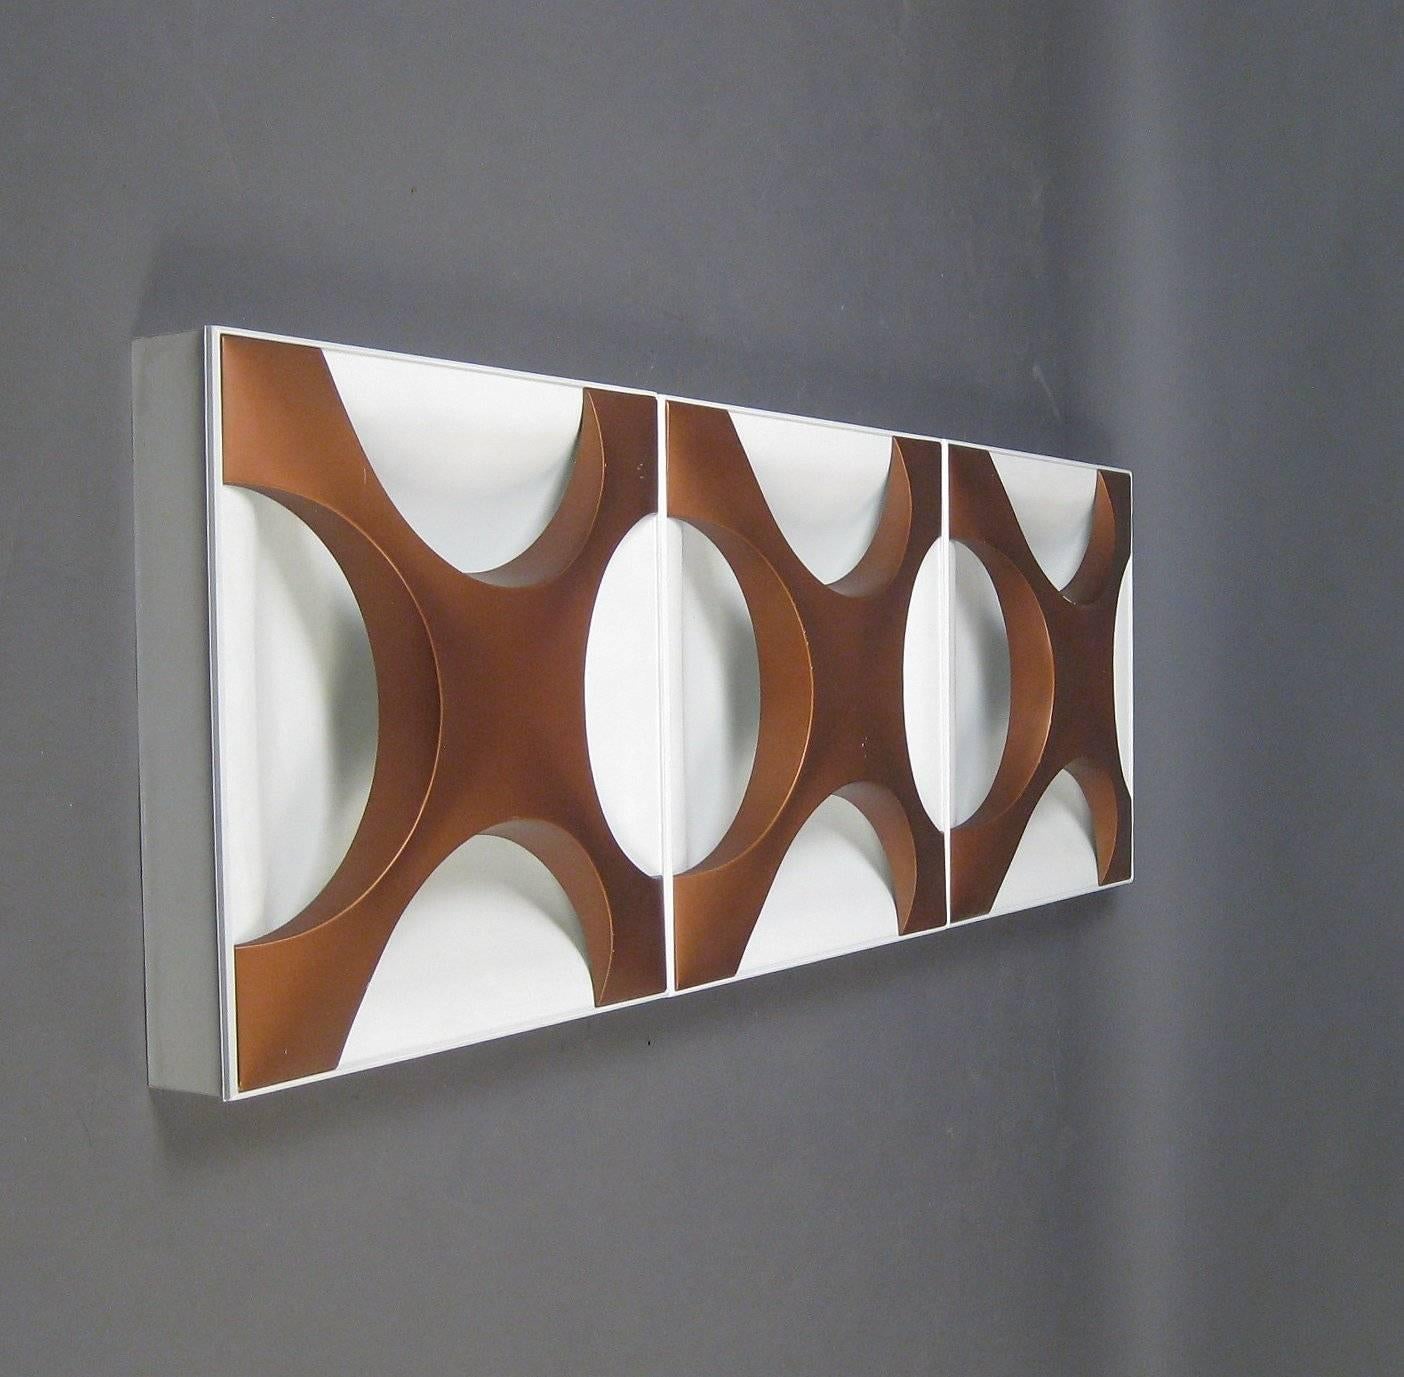 Ceiling or wall light model oyster, German design by Rolf Kru¨ger for staff. Design, circa 1968. Construction made of white lacquered steel sheet, covers copper-lacquered, equipped with four burners each. Partially labelled with sticker.
Seven